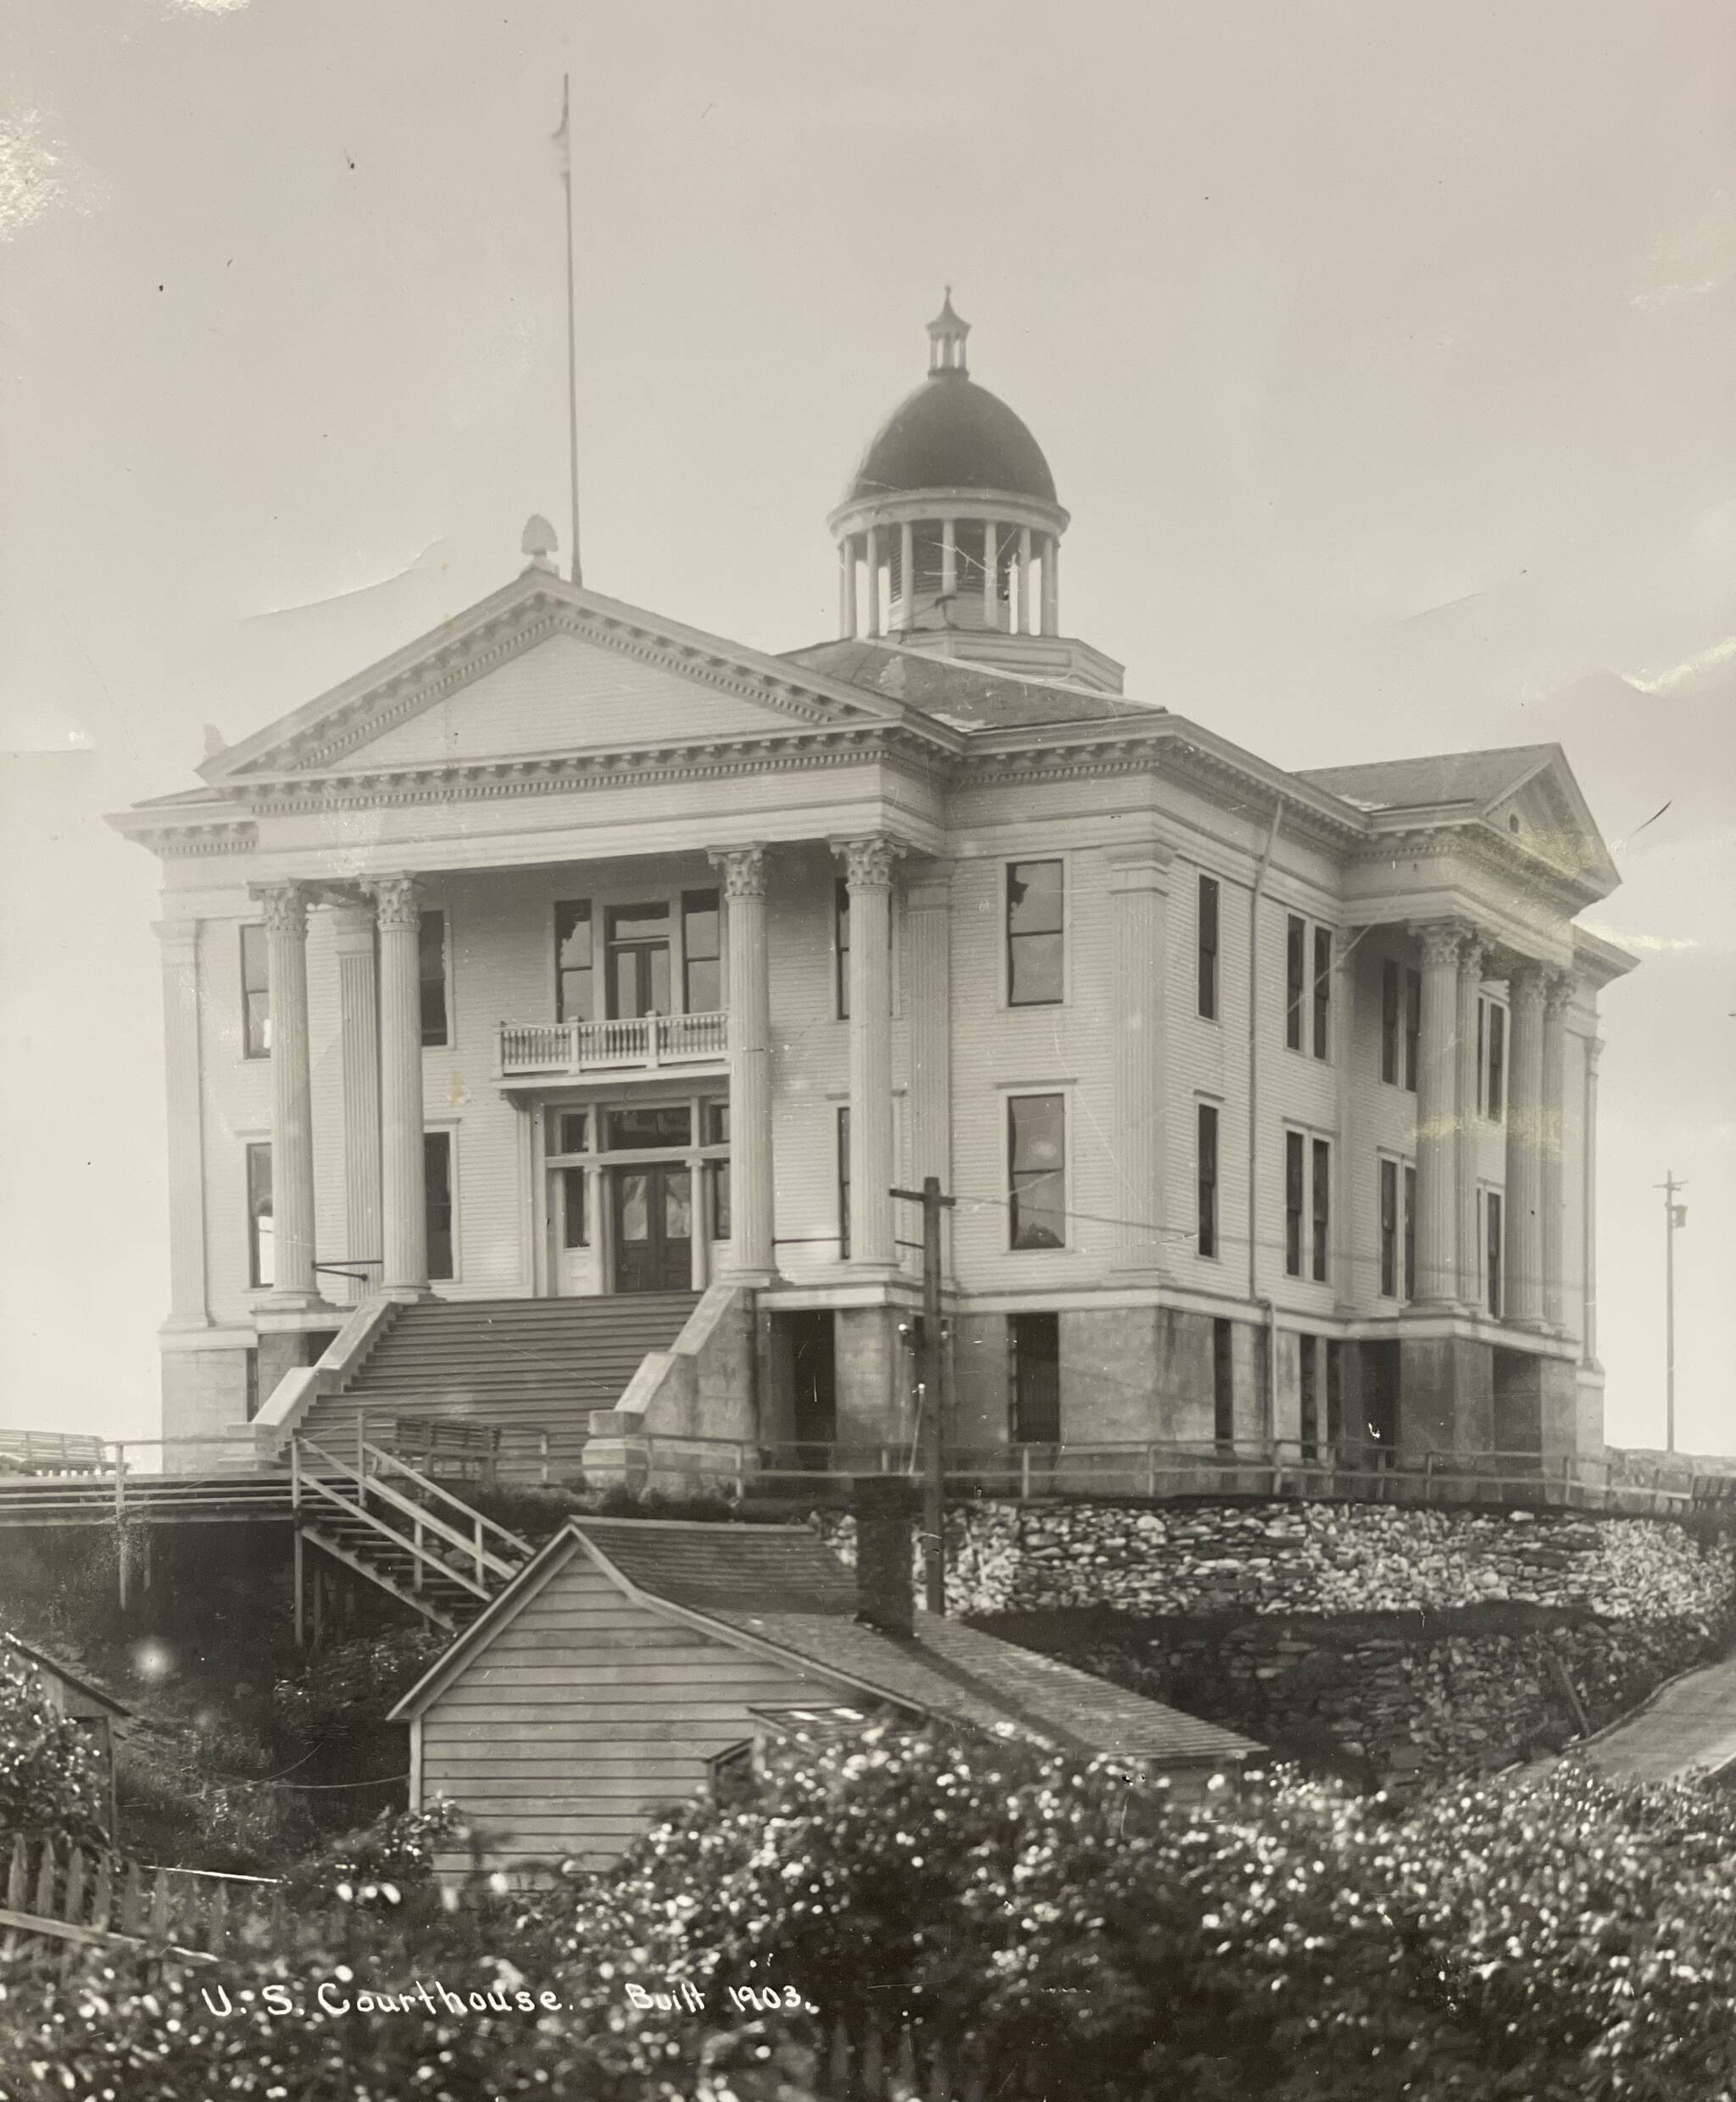 The 1903 courthouse had pillared entries on all sides and one wide grand staircase facing south. (Alaska State Library PCA01-1074)